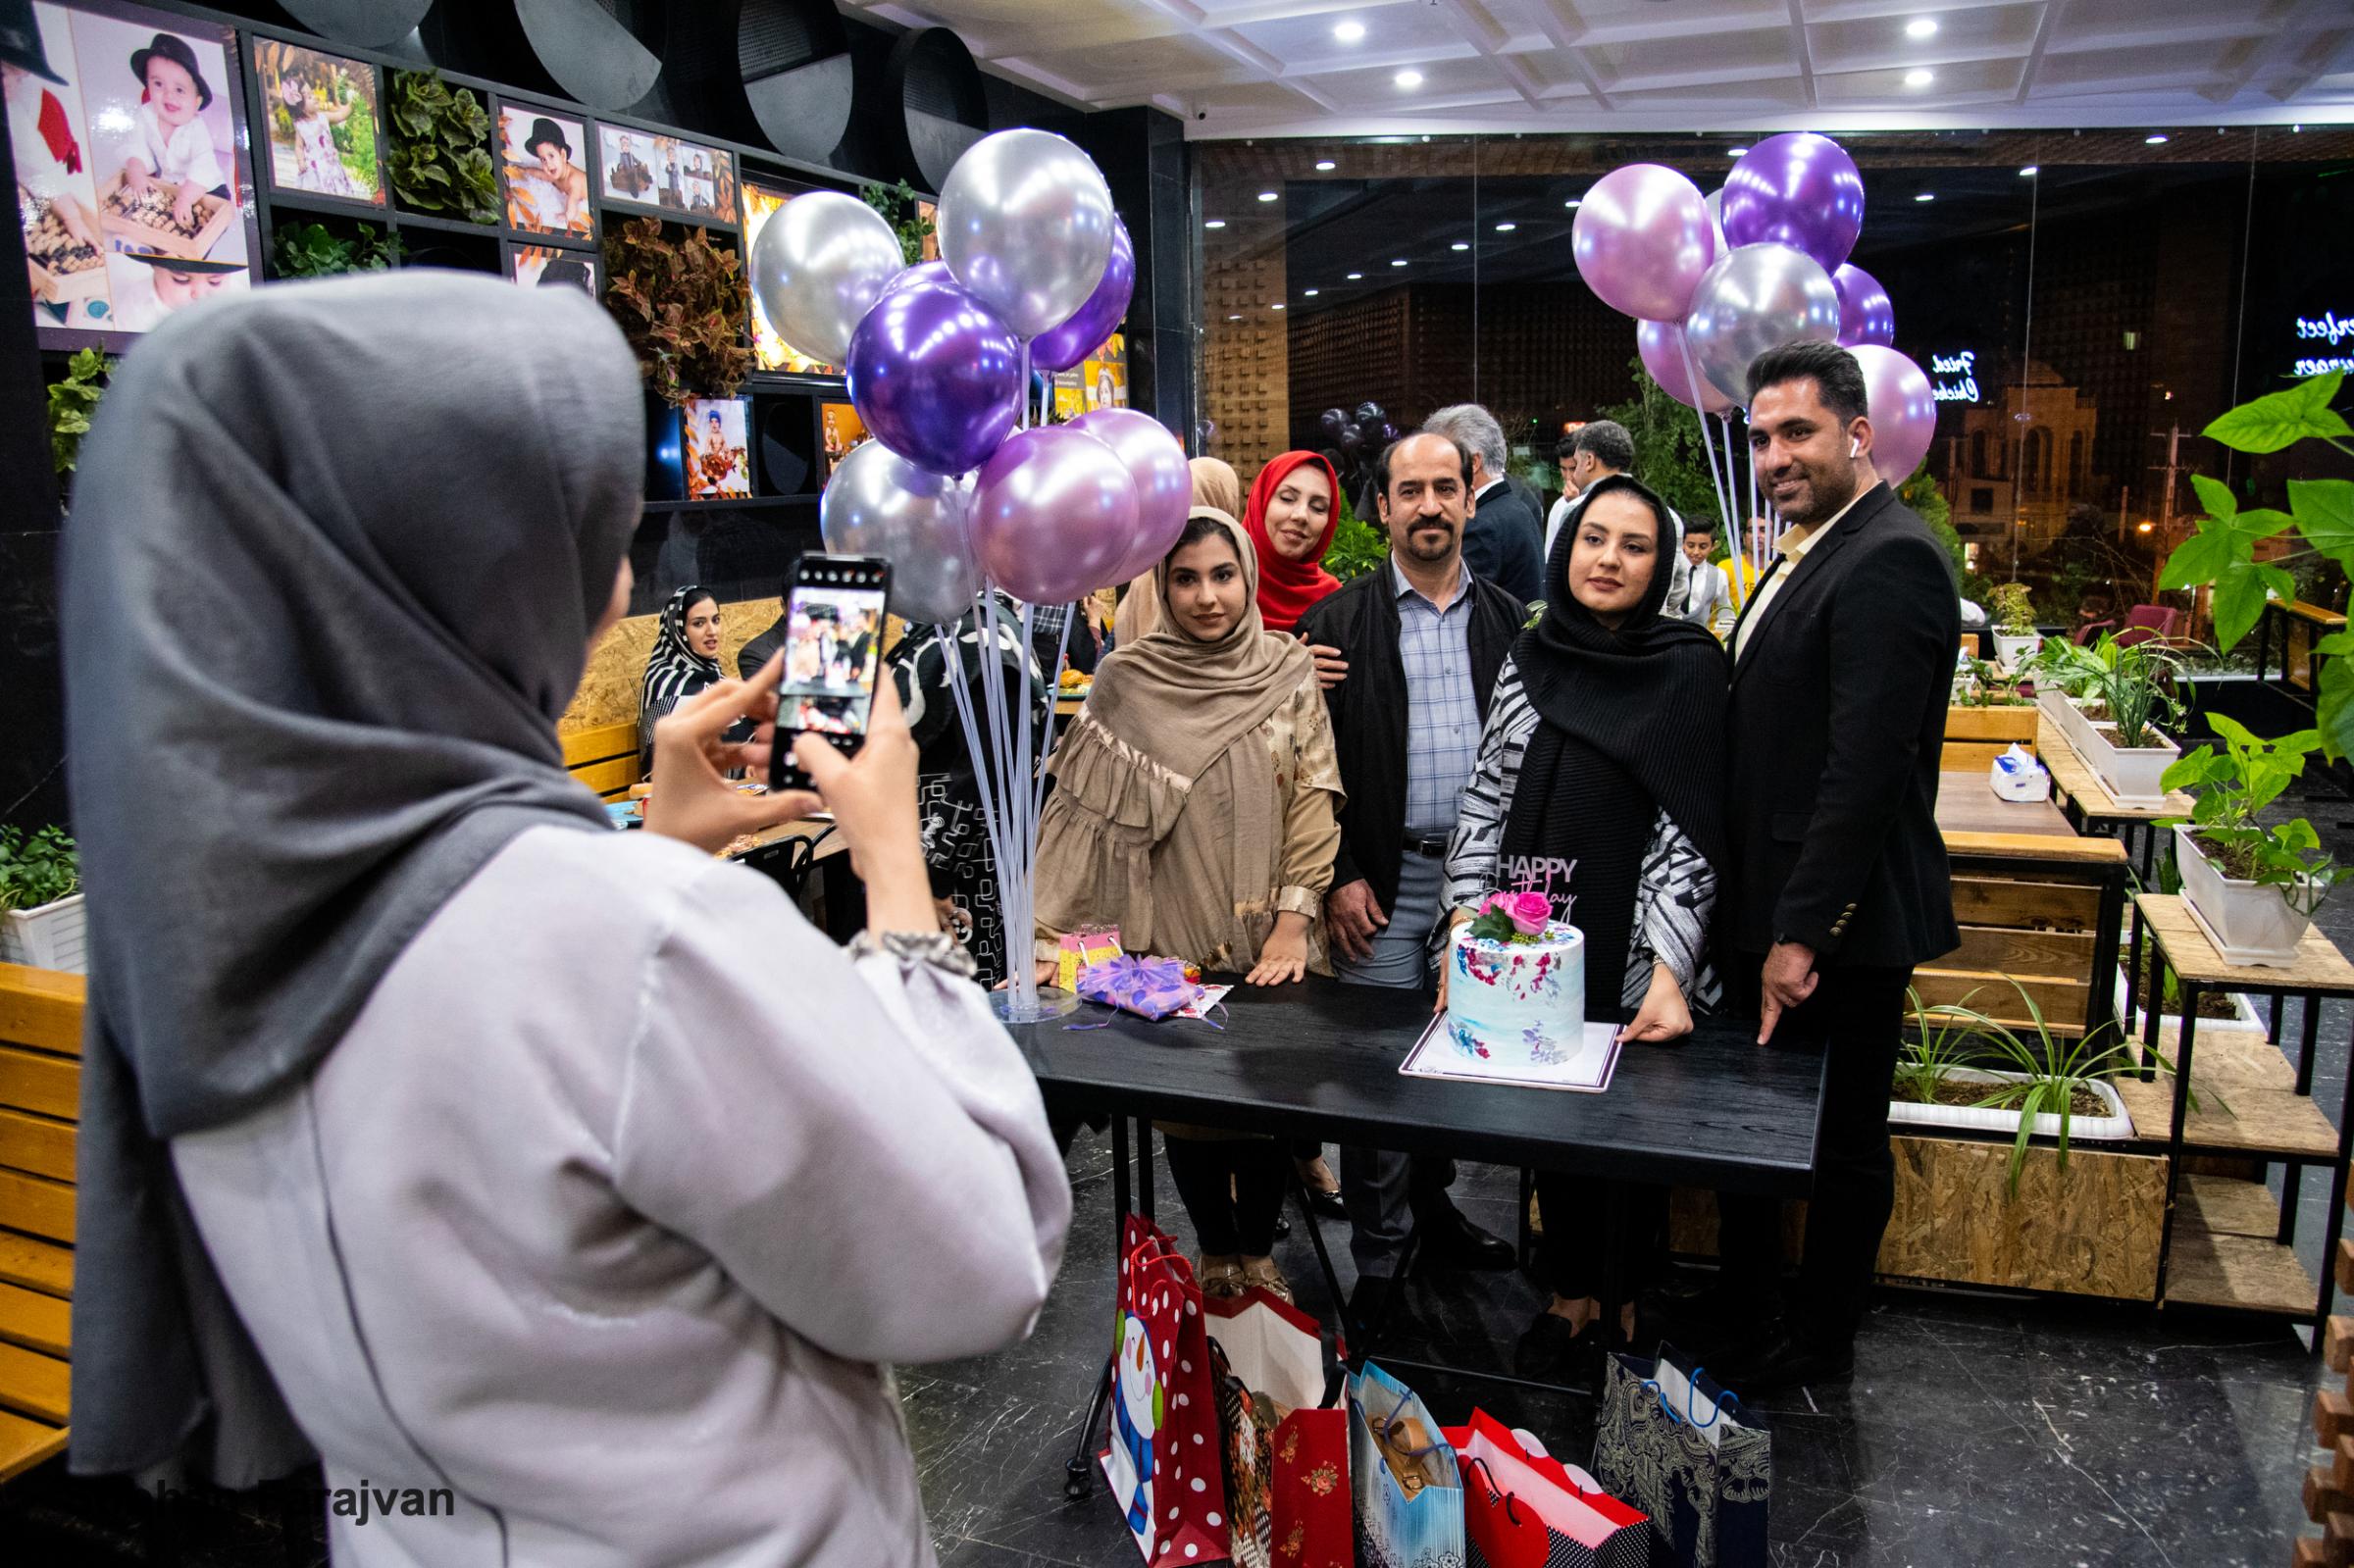 COVID-19 pandemic in Iran (2020-2022) - An Iranian family celebrates a birthday in a restaurant...